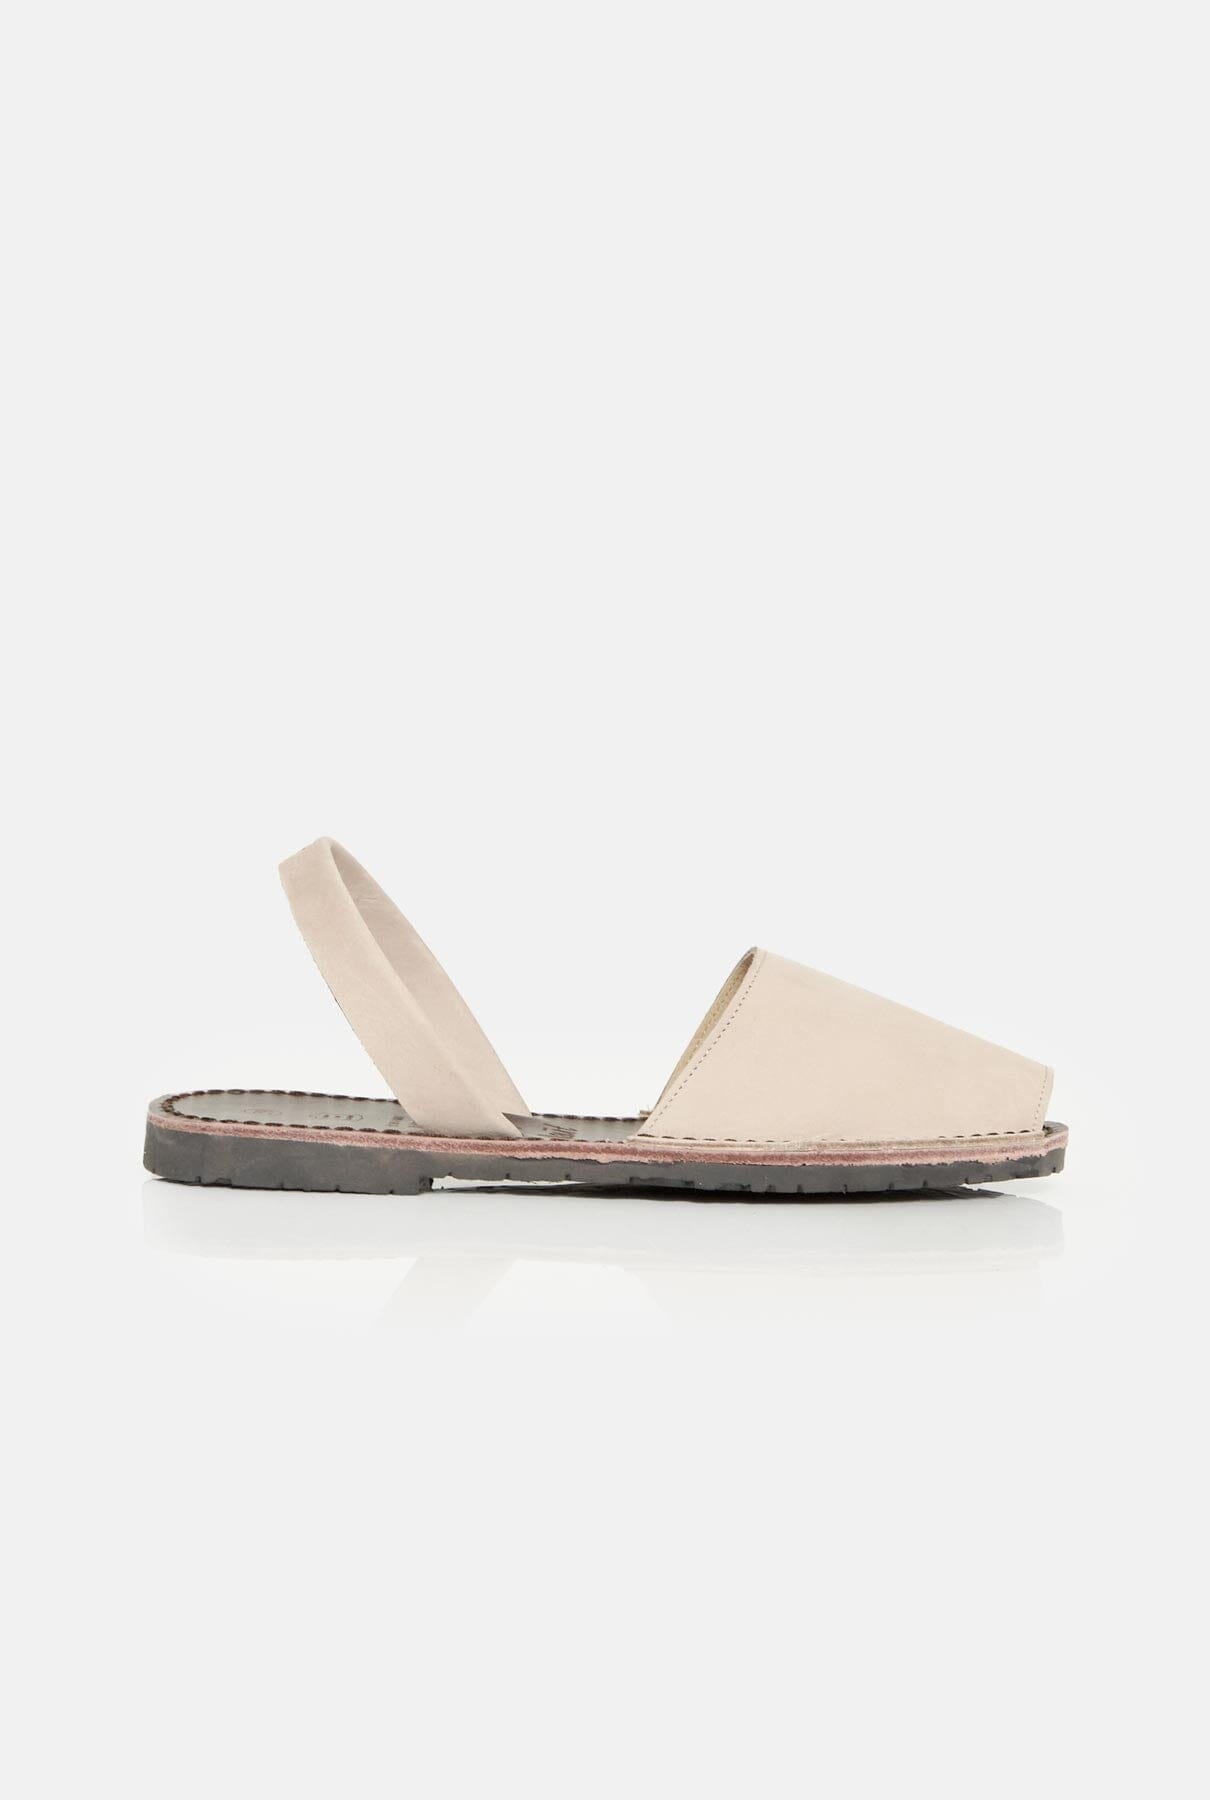 Avarcas Lithica Flat shoes The Llaut 